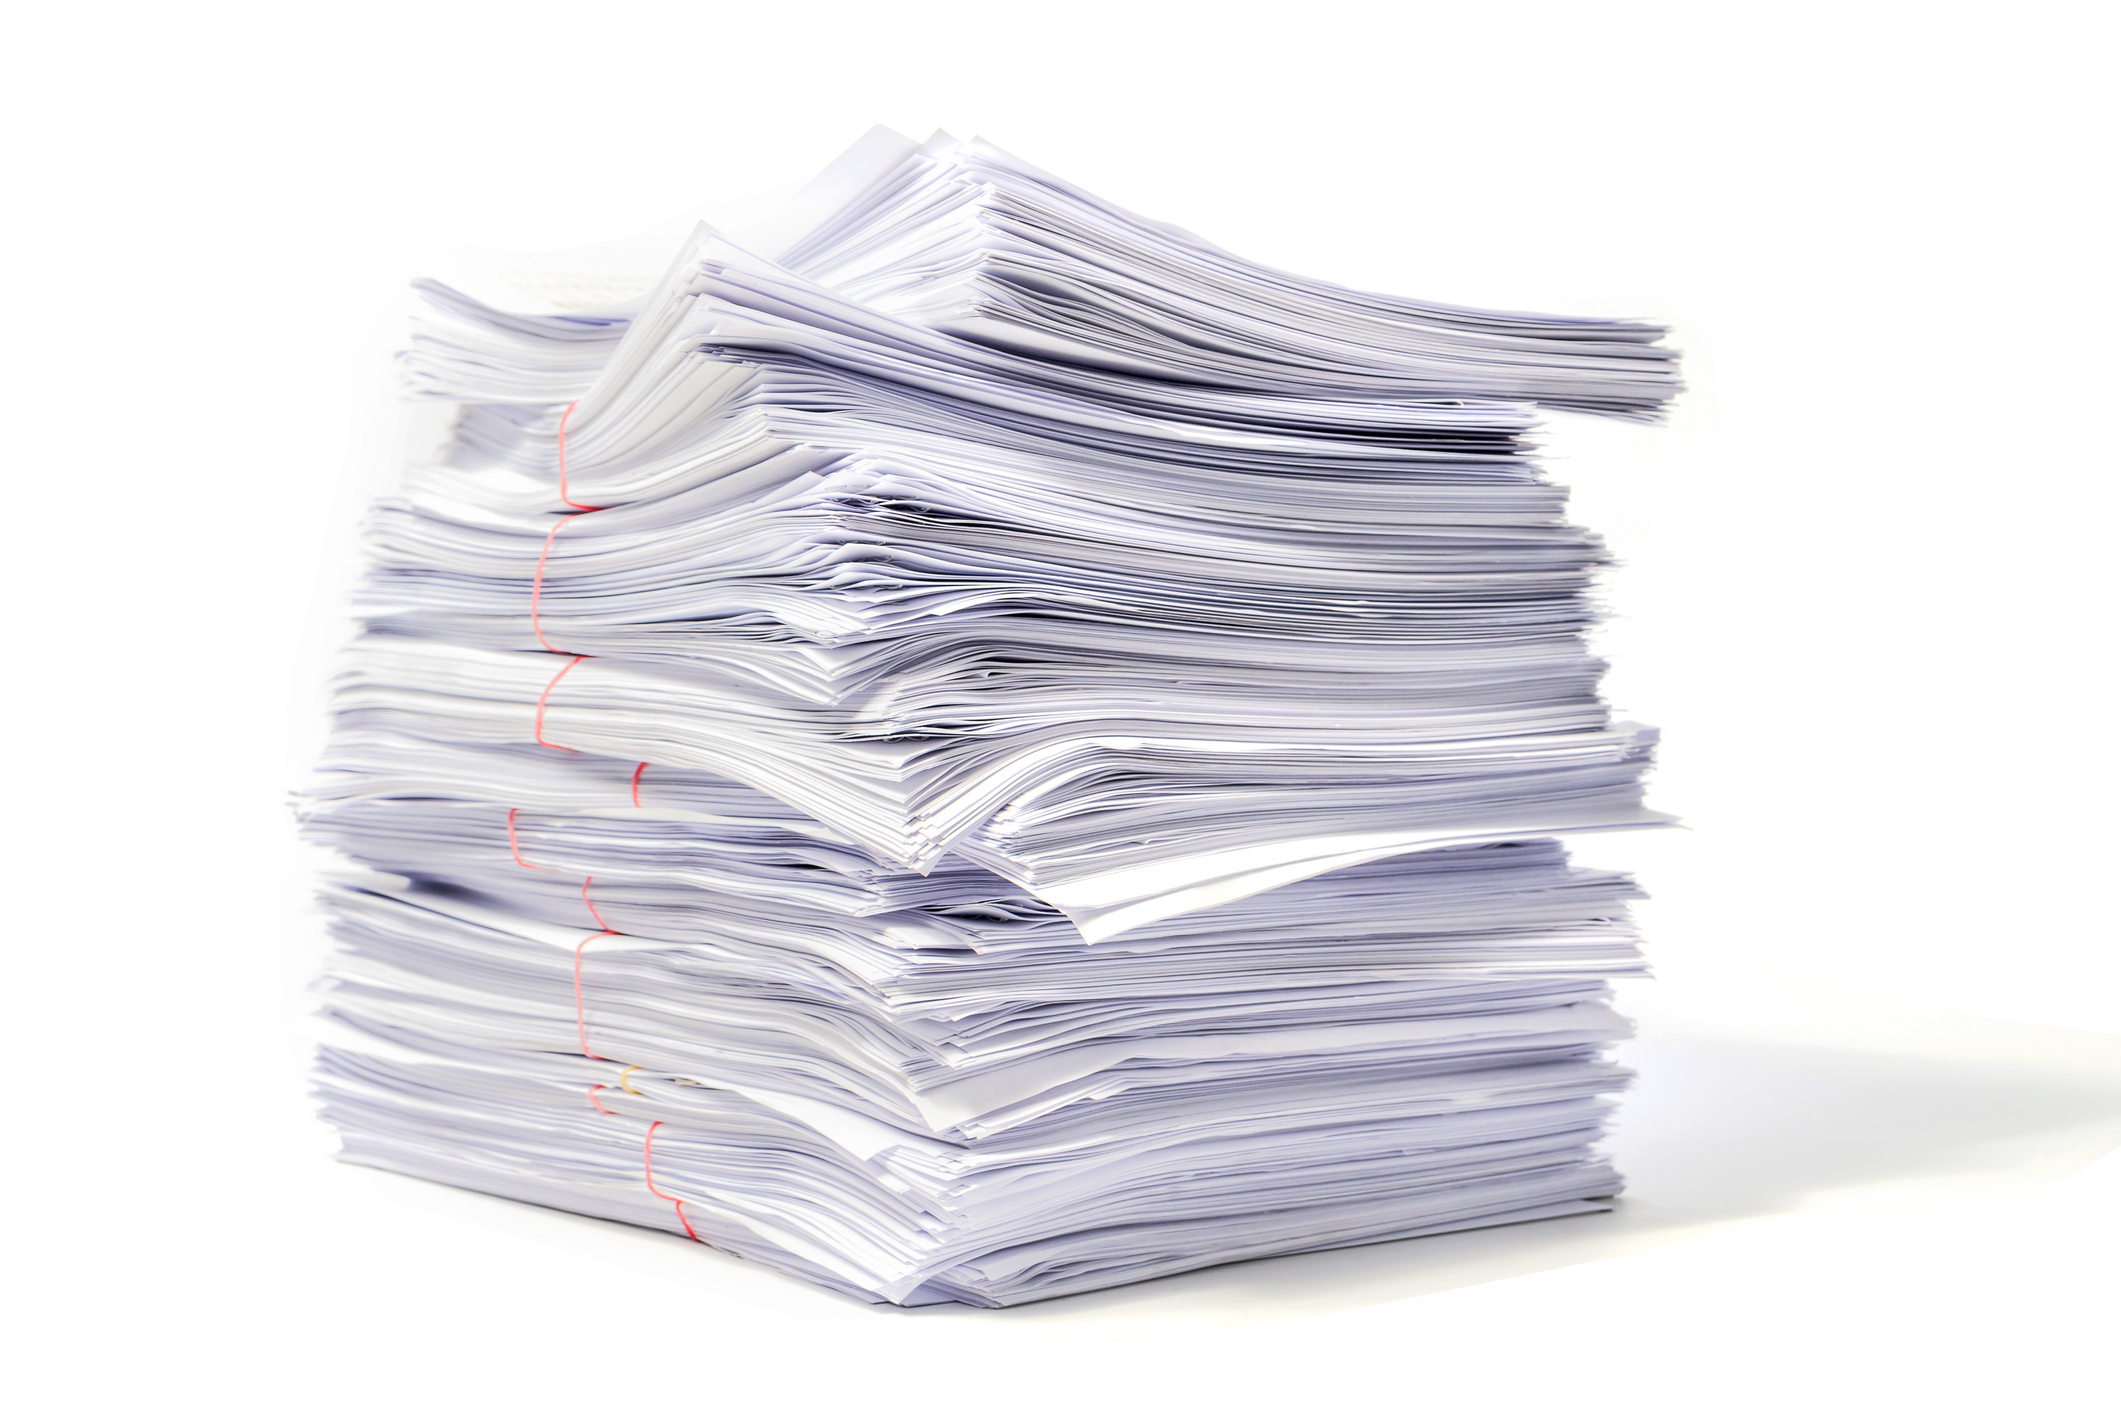 A big pile of papers